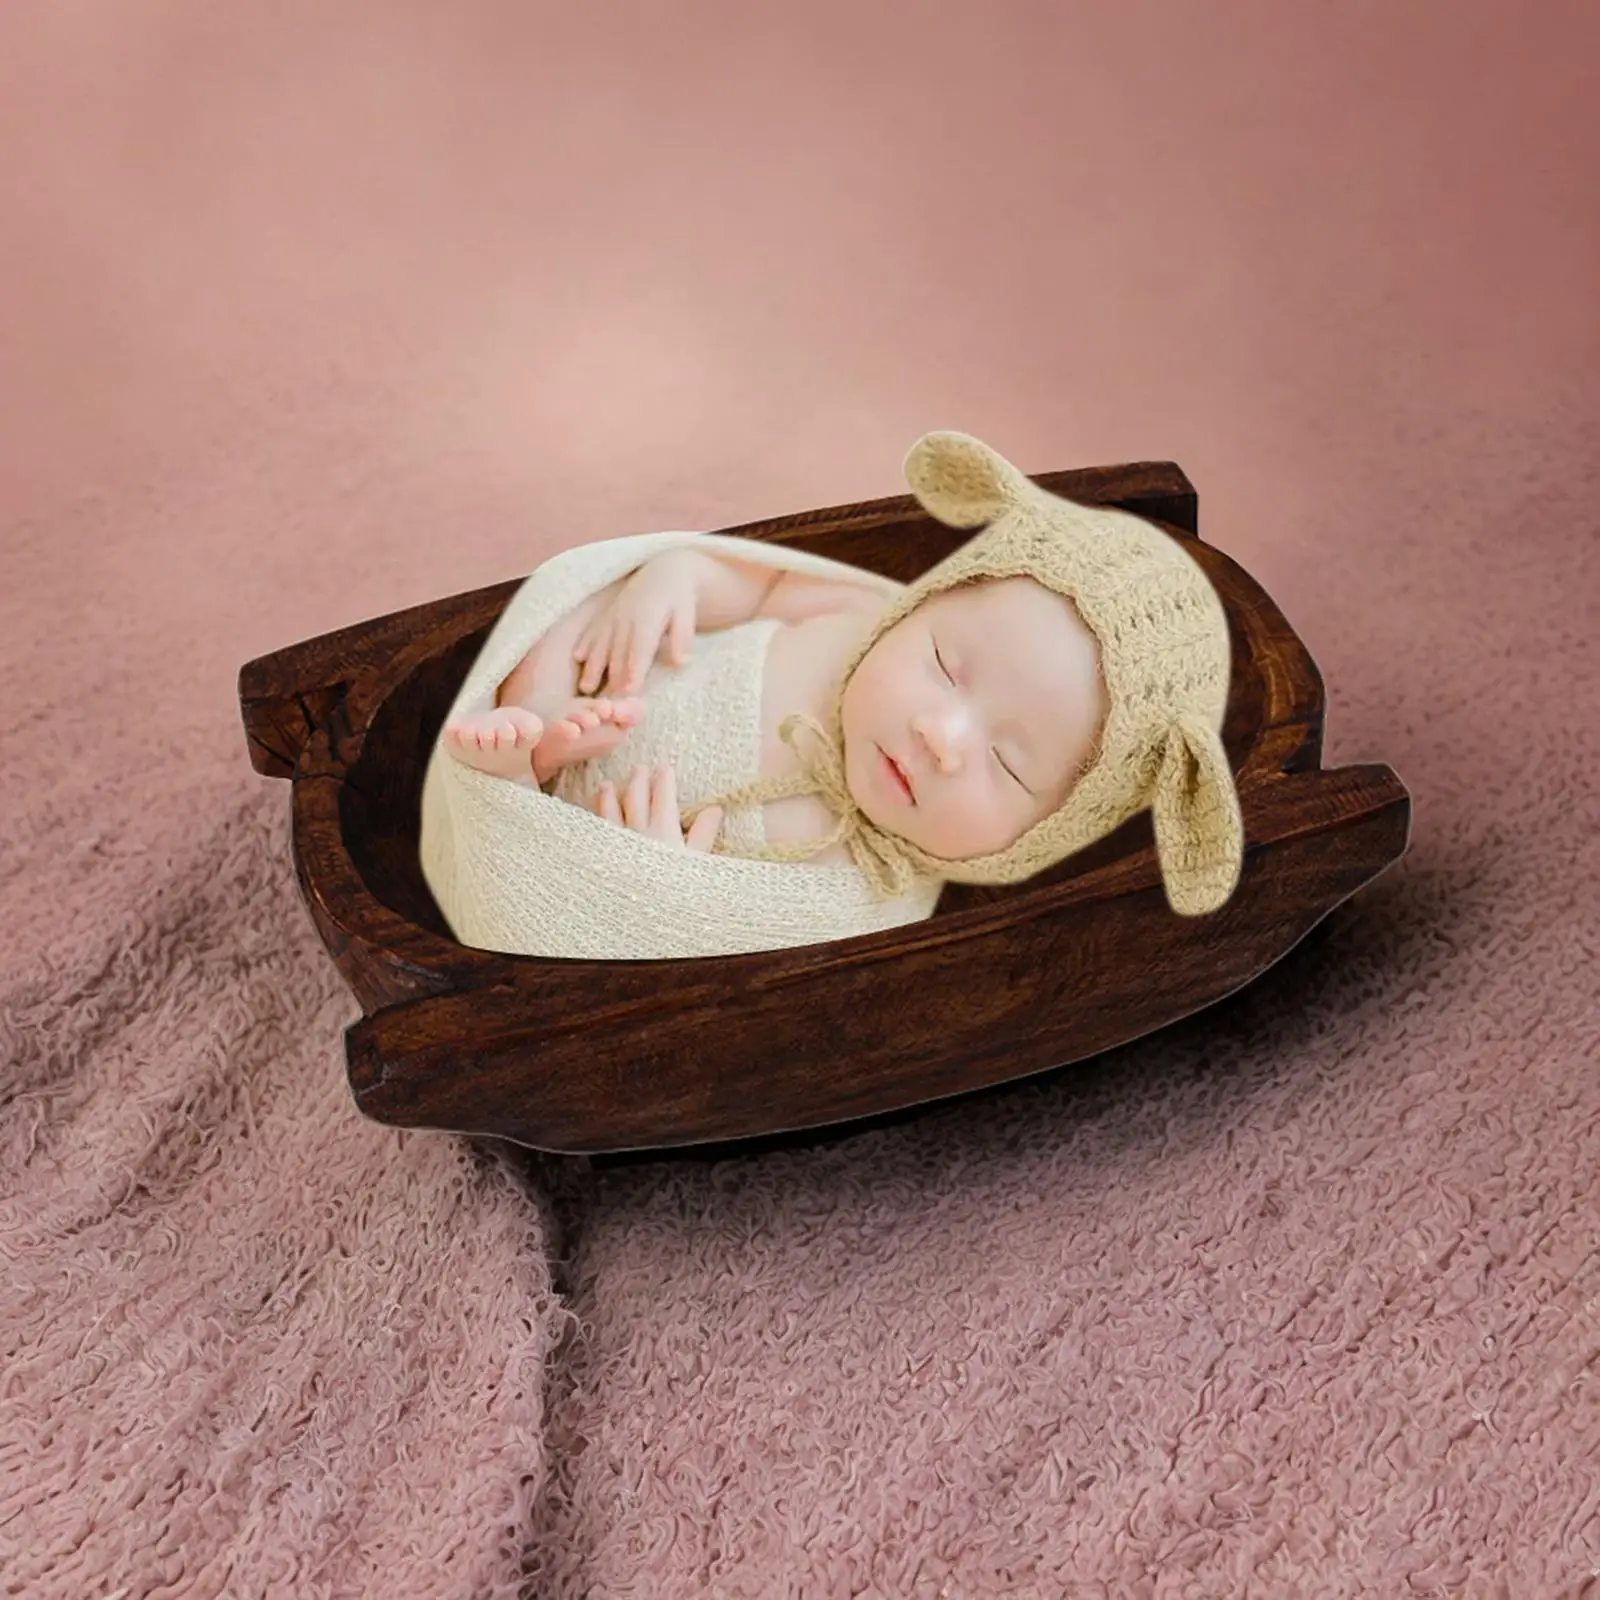 Newborn Baby Photography Props Wooden Basin Decoration Mini Couch Accessories Bed for Baby Shower Baby Girls Boys Birthday